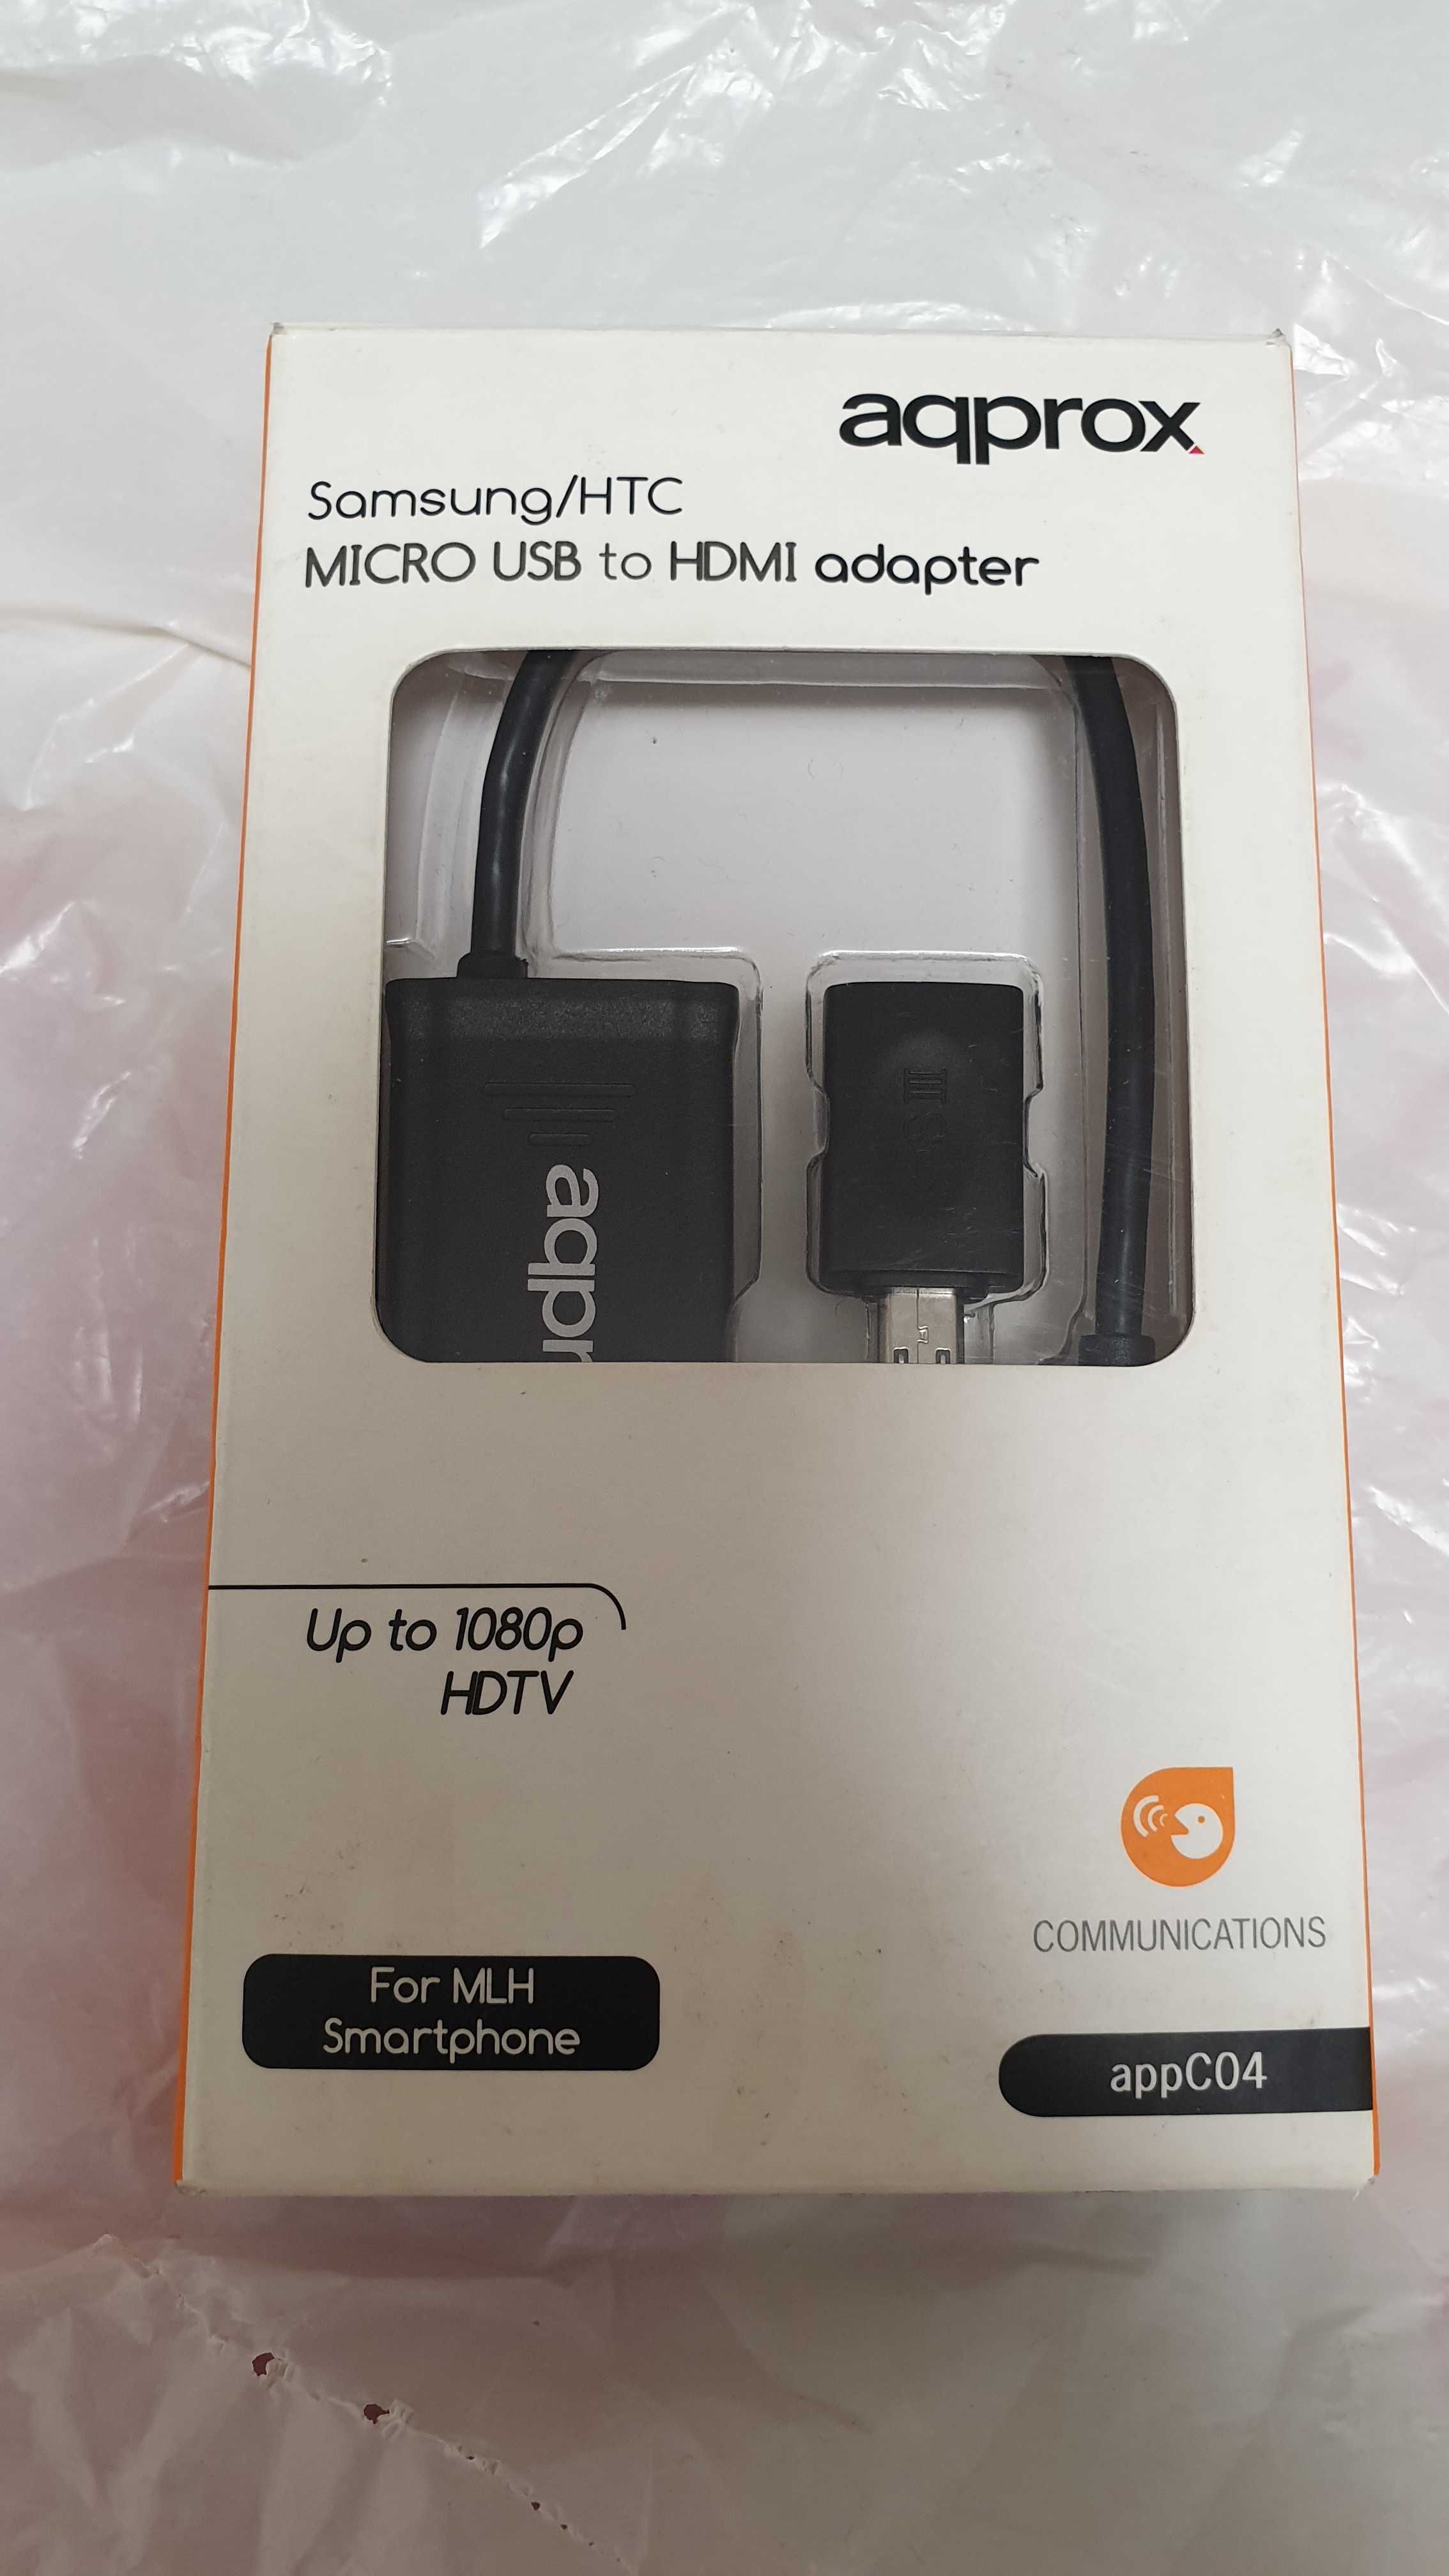 Micro USB To HDMI Adapter for MHL Smartphone (APPC04)